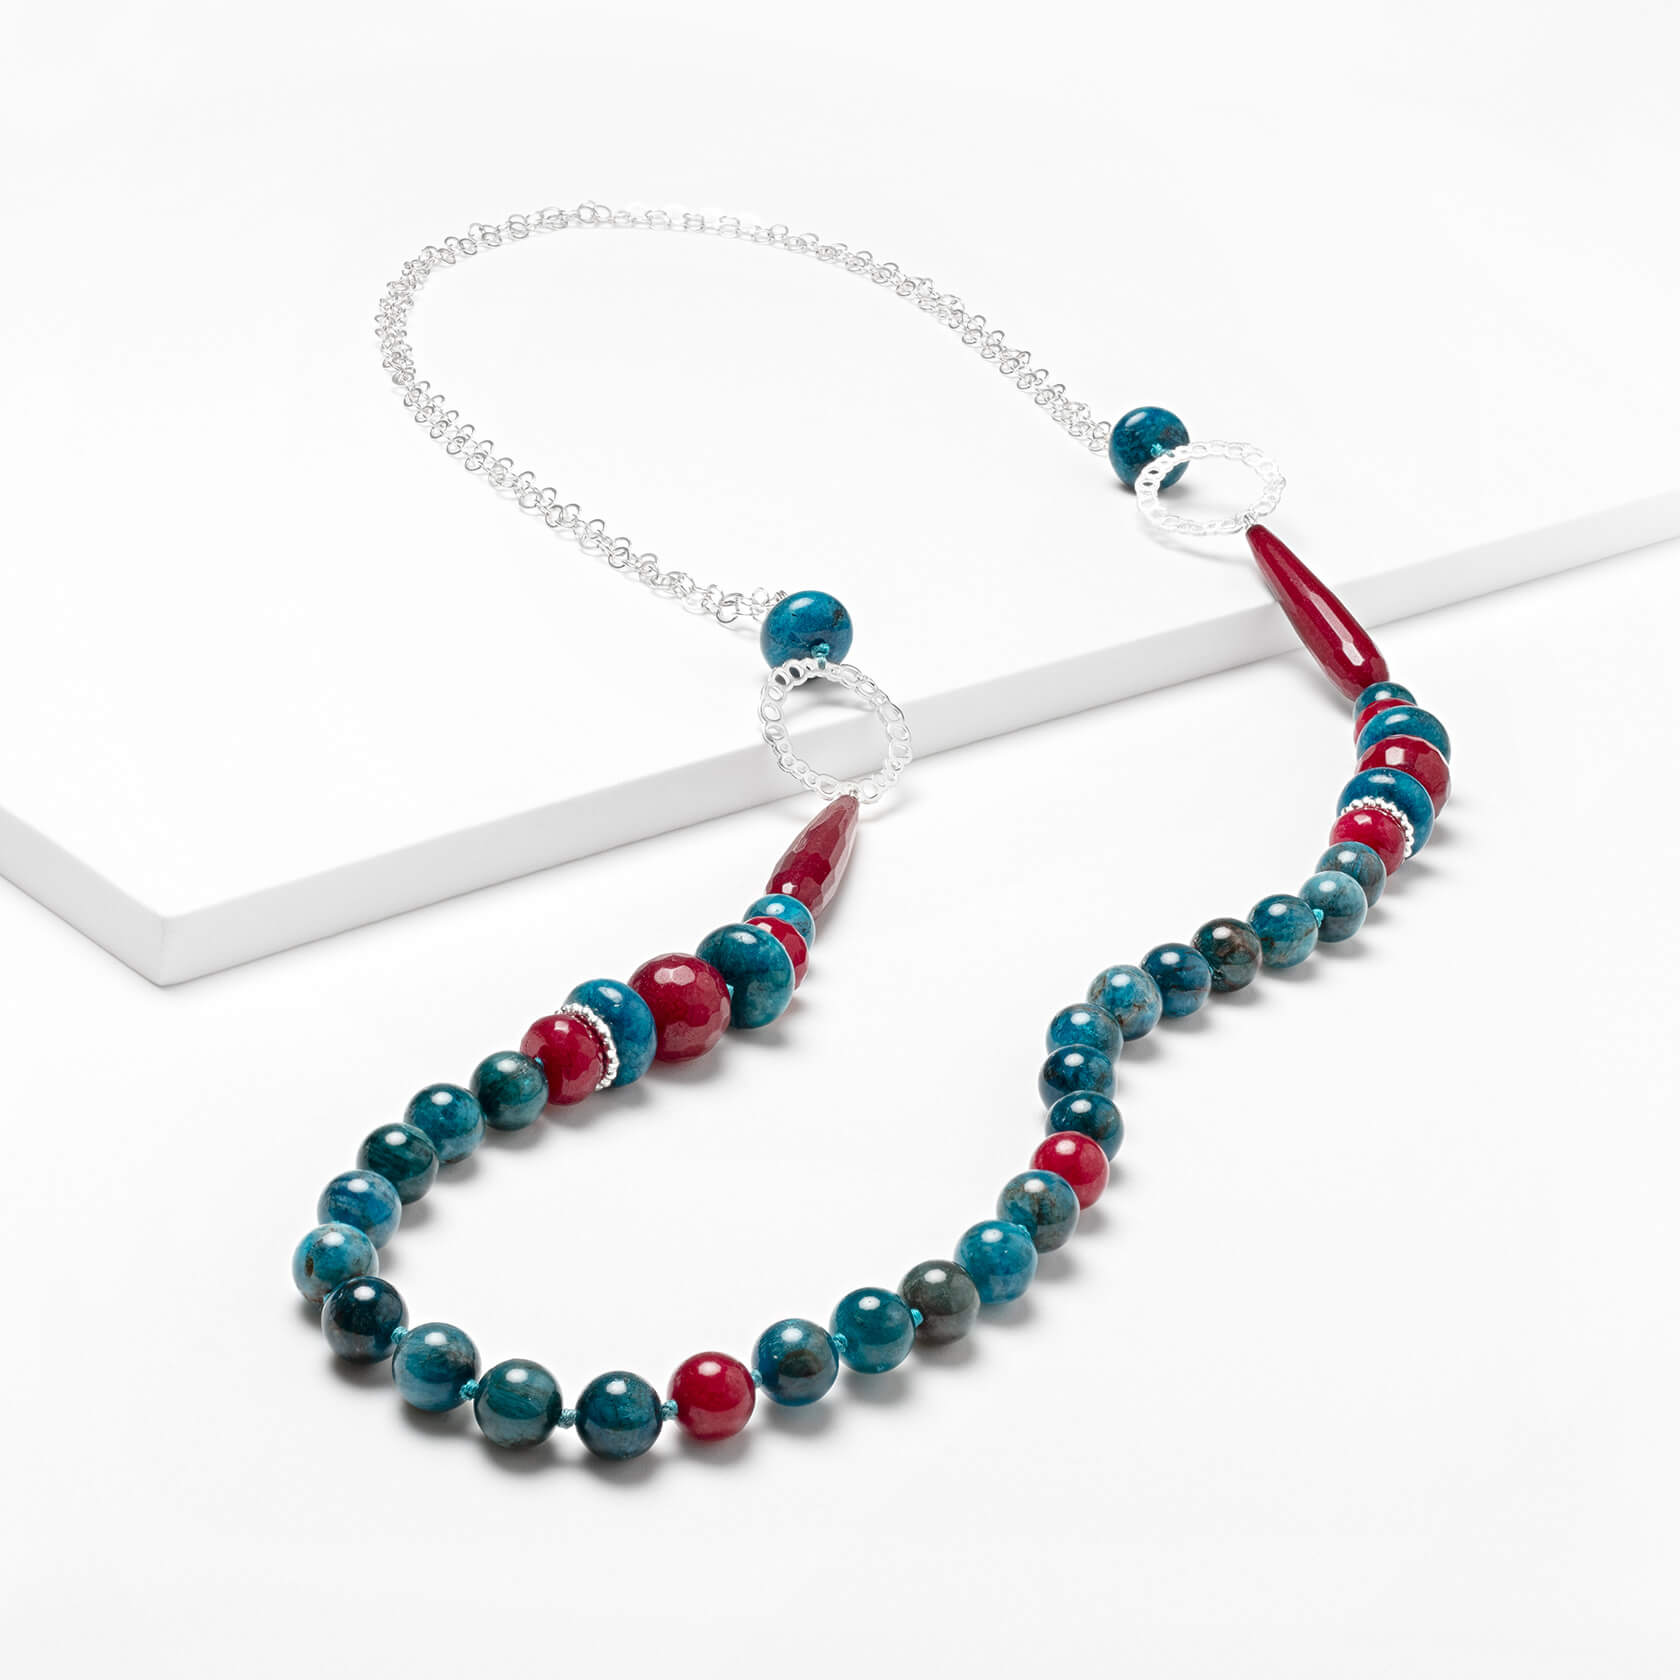 Agate and apatite long necklace